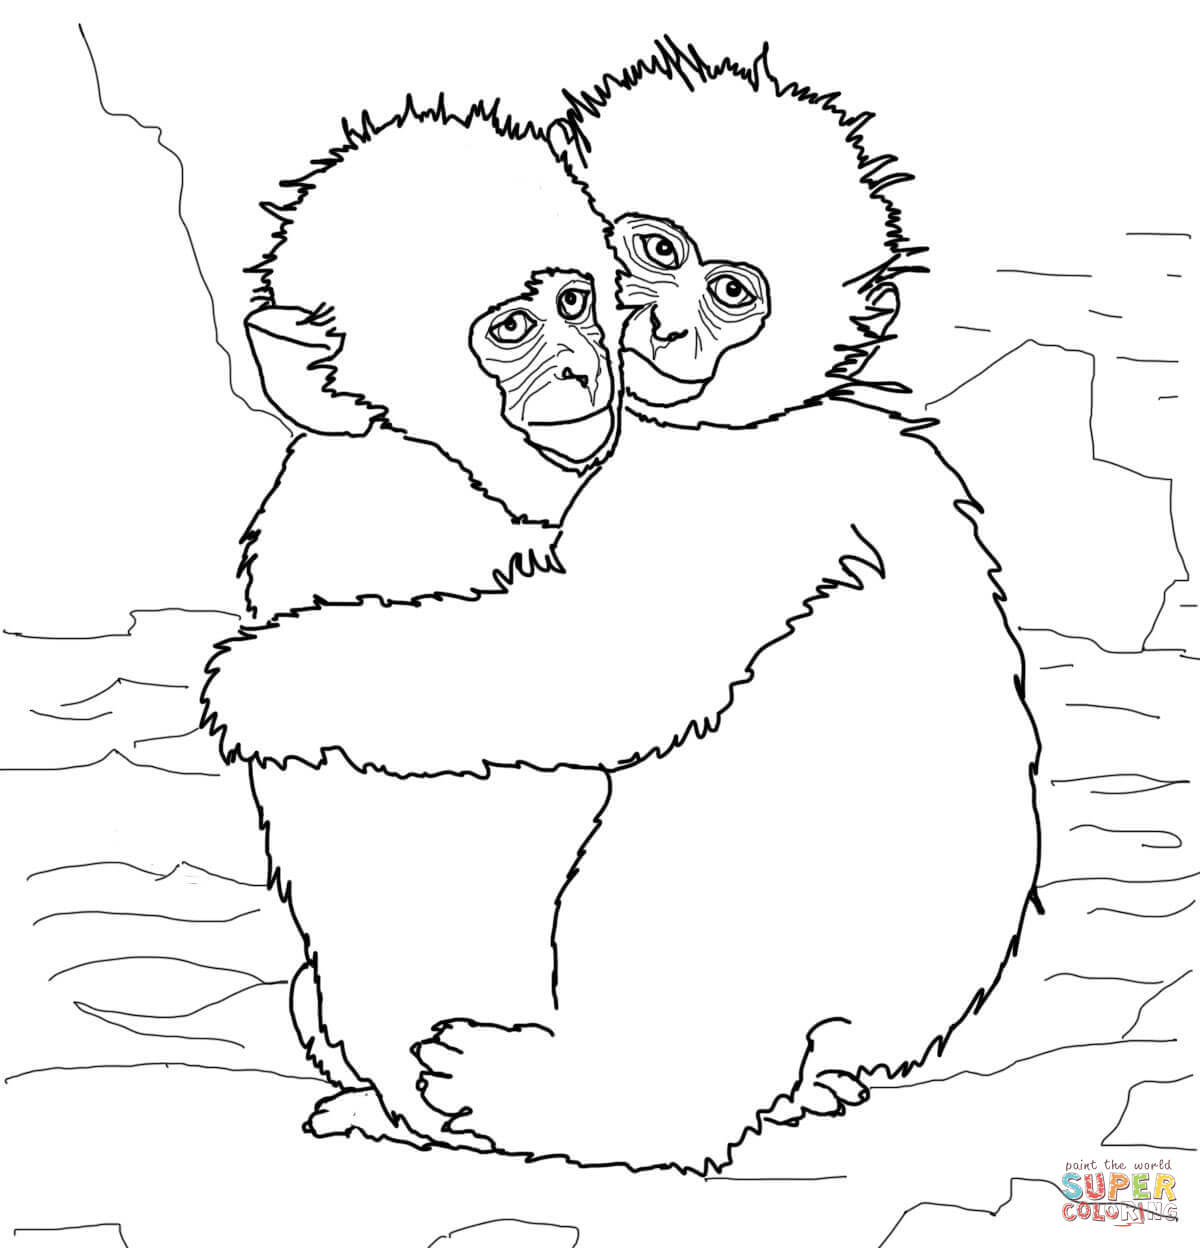 Macaque coloring #4, Download drawings